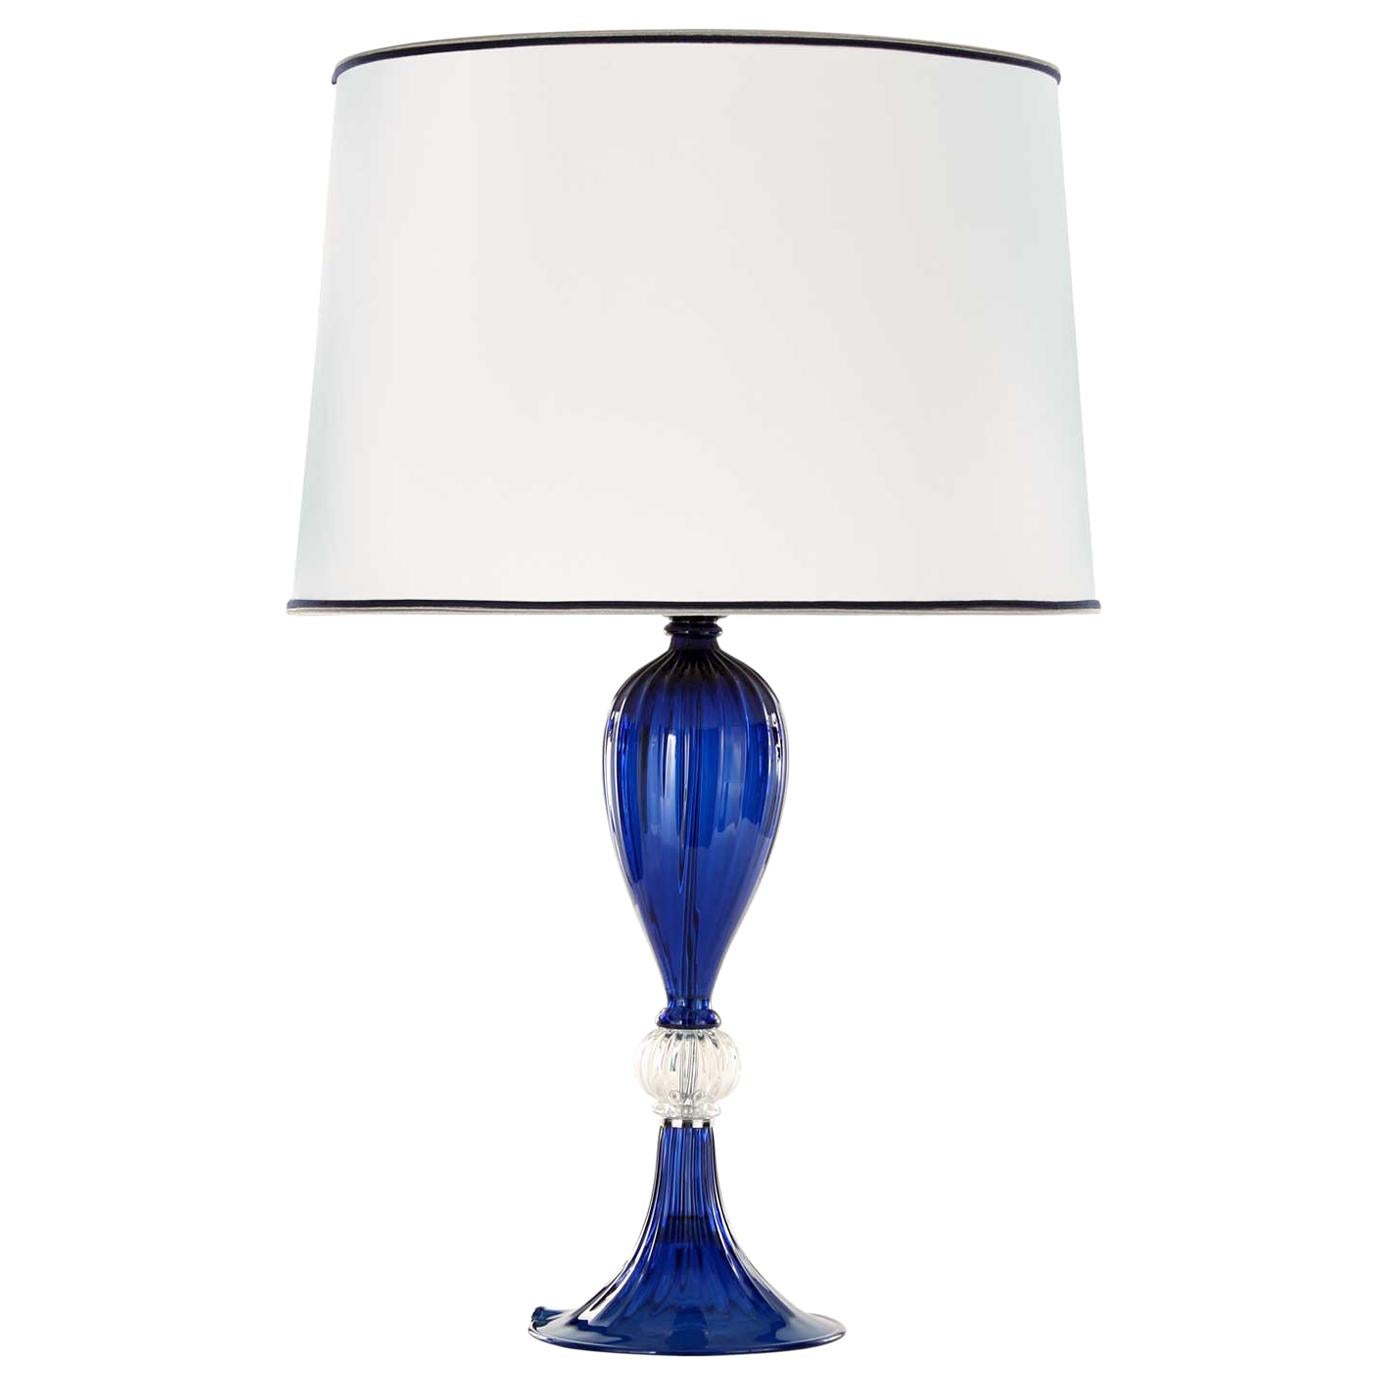 Artistic Table Lamp Blue Transparent Murano Glass White Lampshade by Multiforme